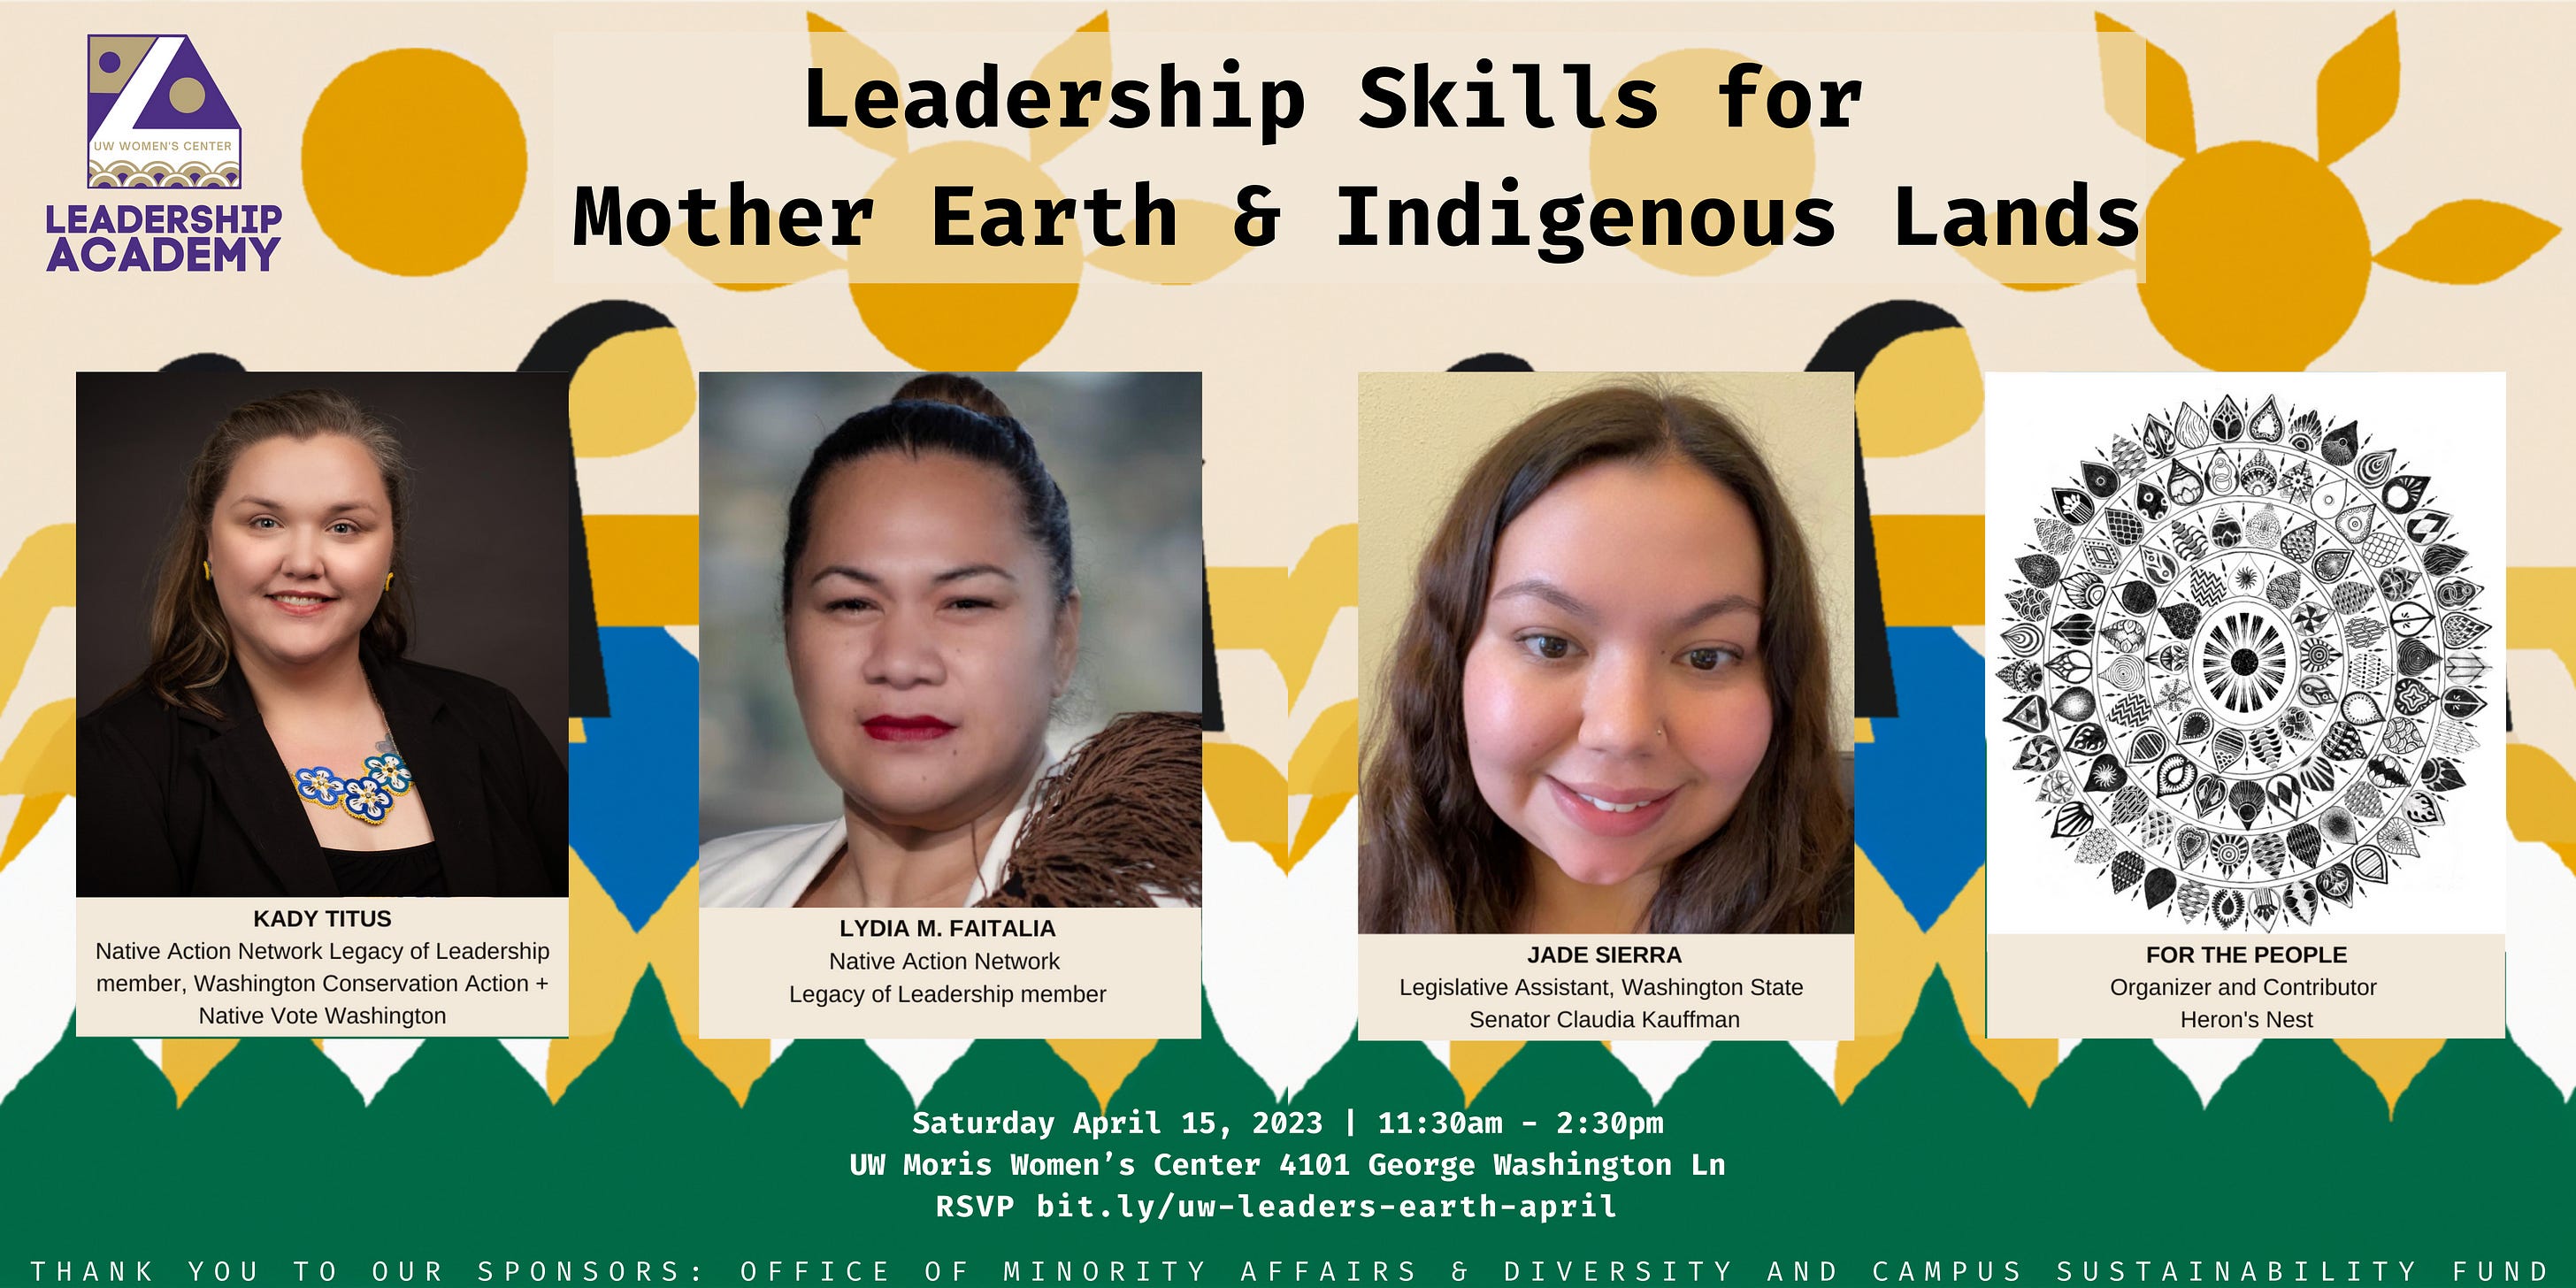 Leadership Skills for Mother Earth